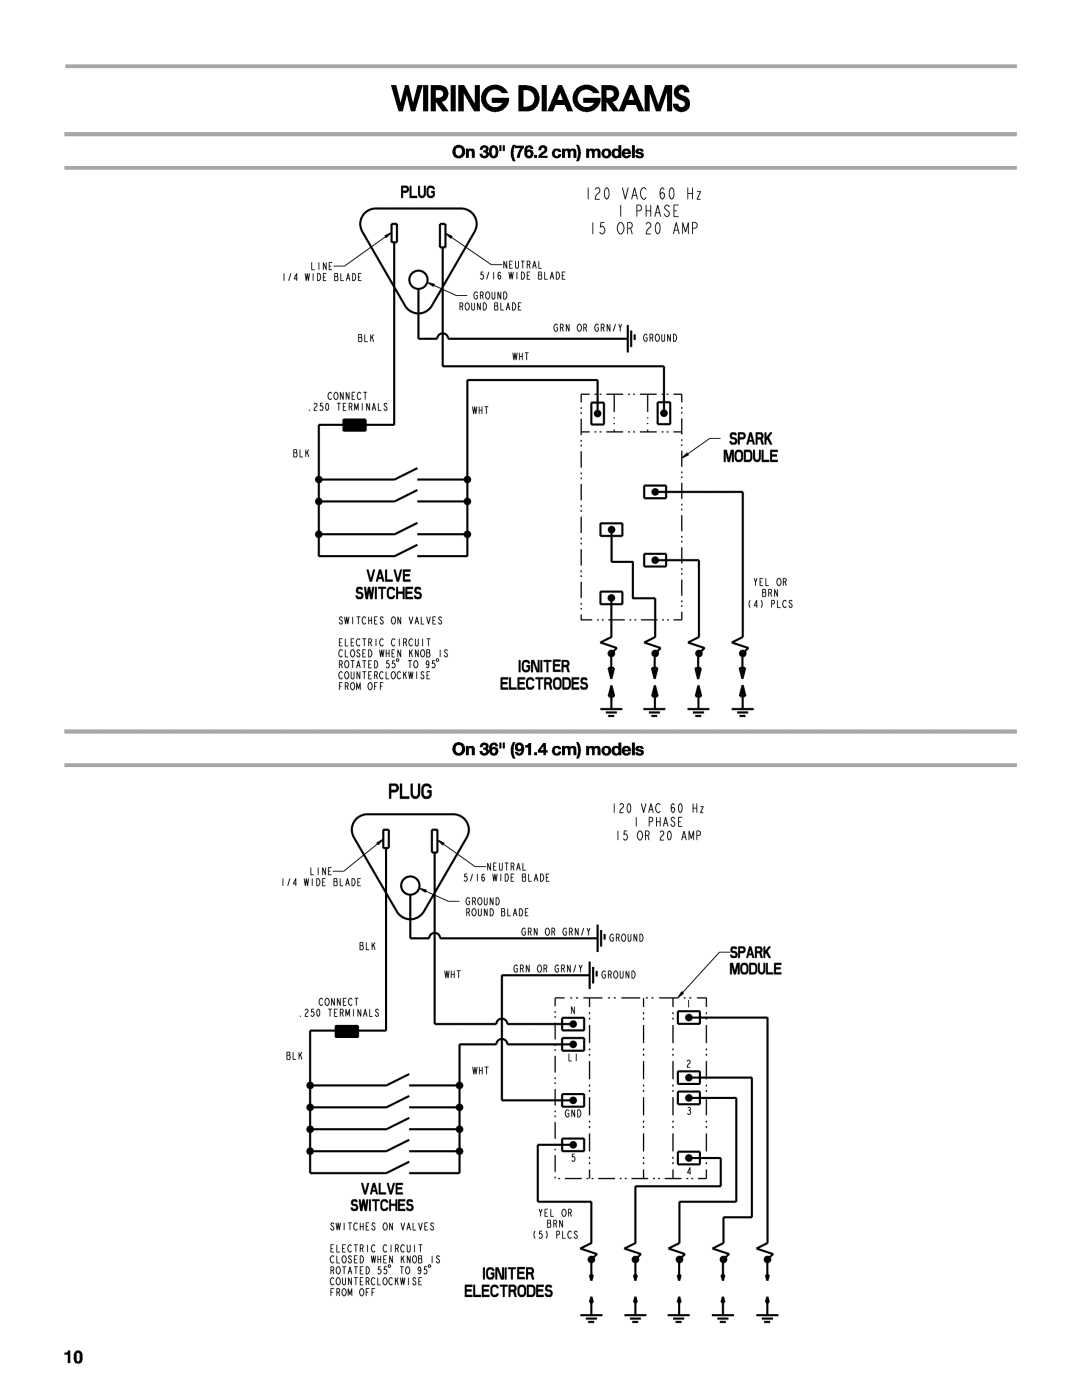 Whirlpool Gas Built-In Cooktop installation instructions Wiring Diagrams, On 30 76.2 cm models On 36 91.4 cm models 